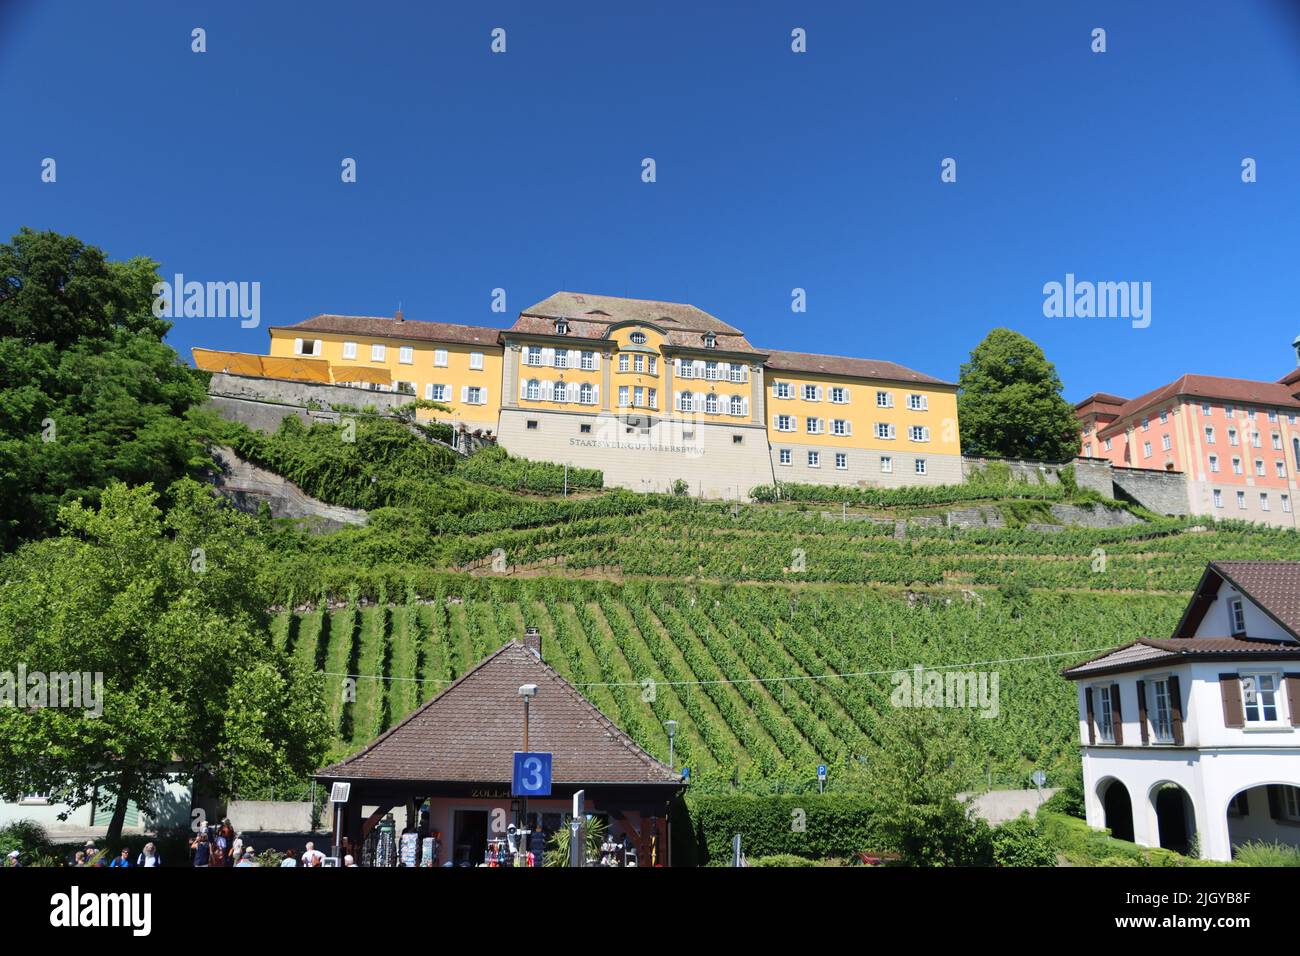 Meersburg scenery at lake of constance. Scenic view and impressions of the ancient city with vinery farming, yacht harbour and ancient castle. Stock Photo